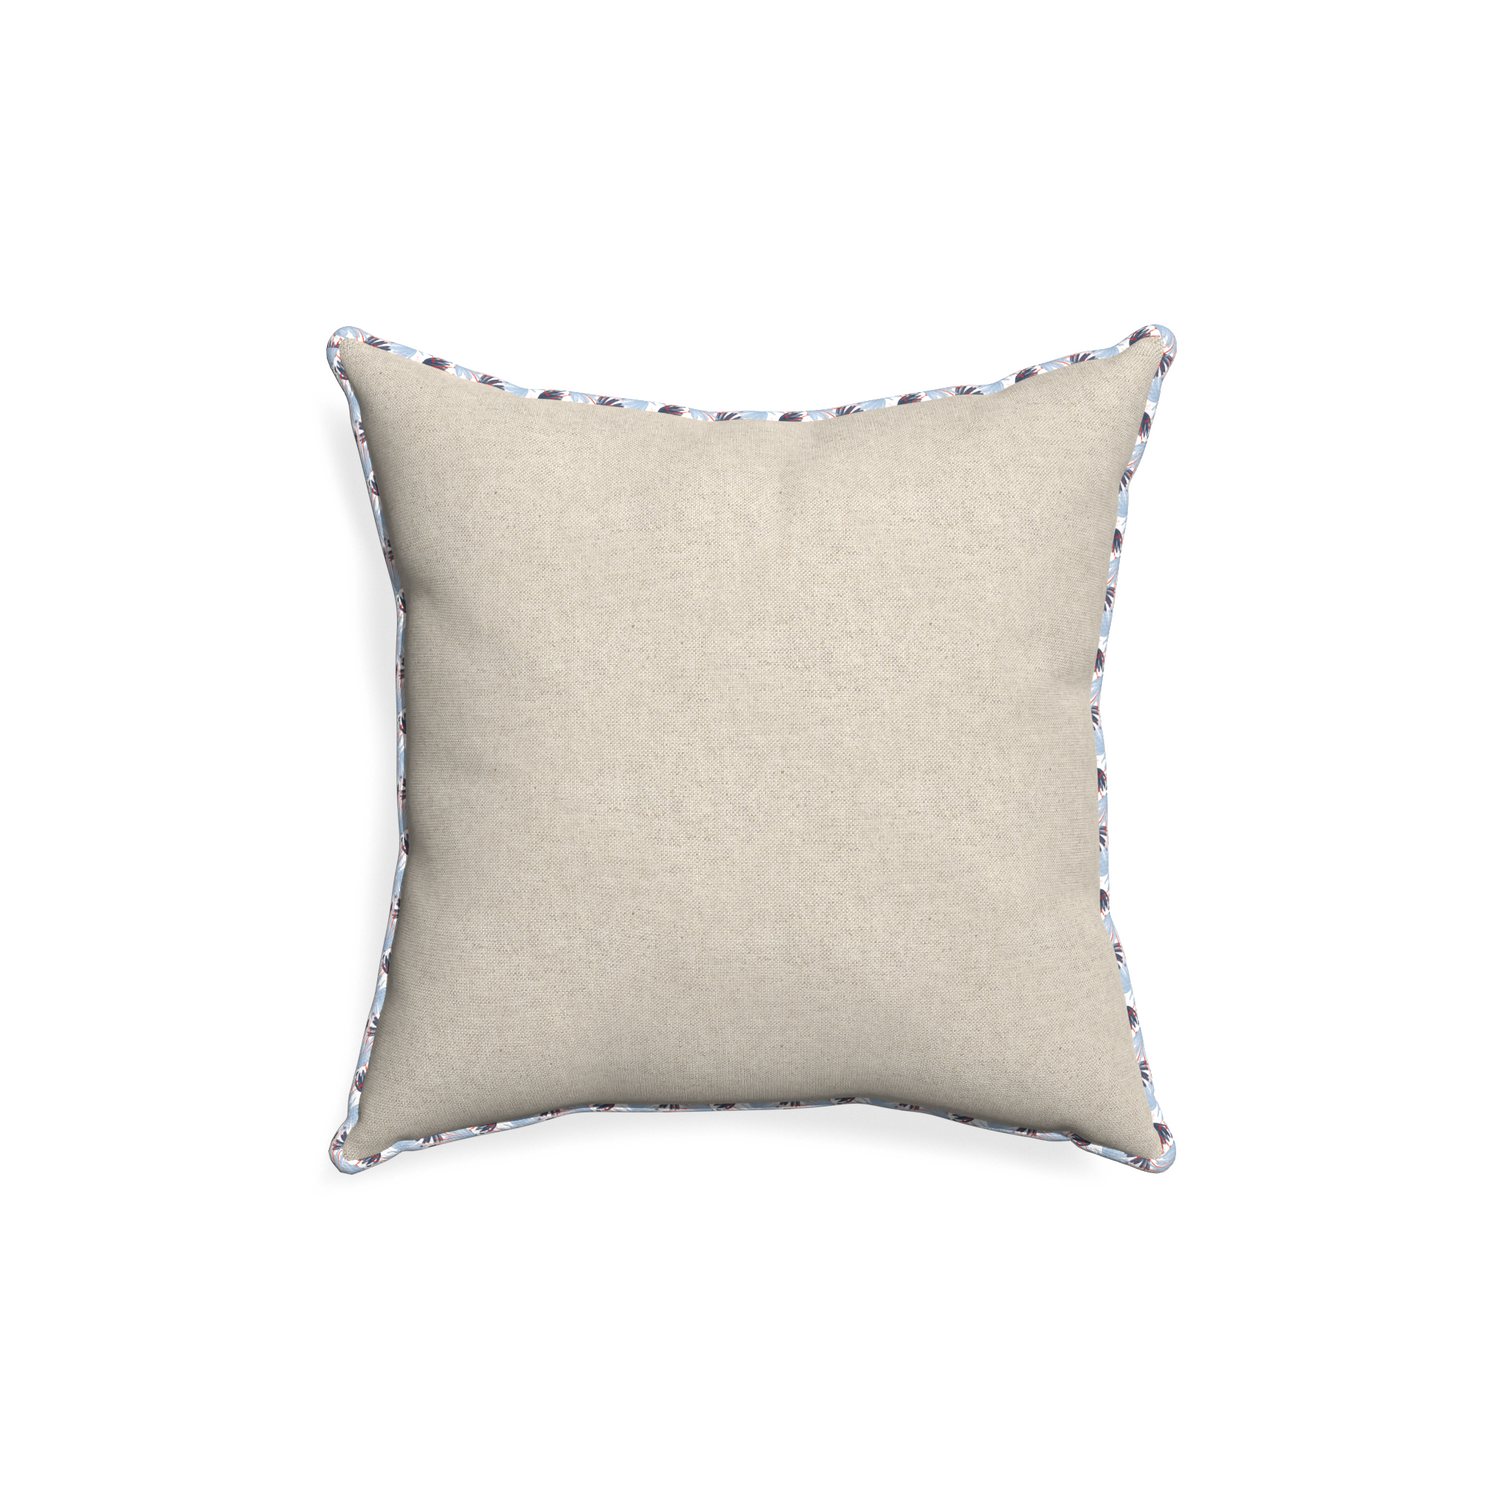 18-square oat custom pillow with e piping on white background